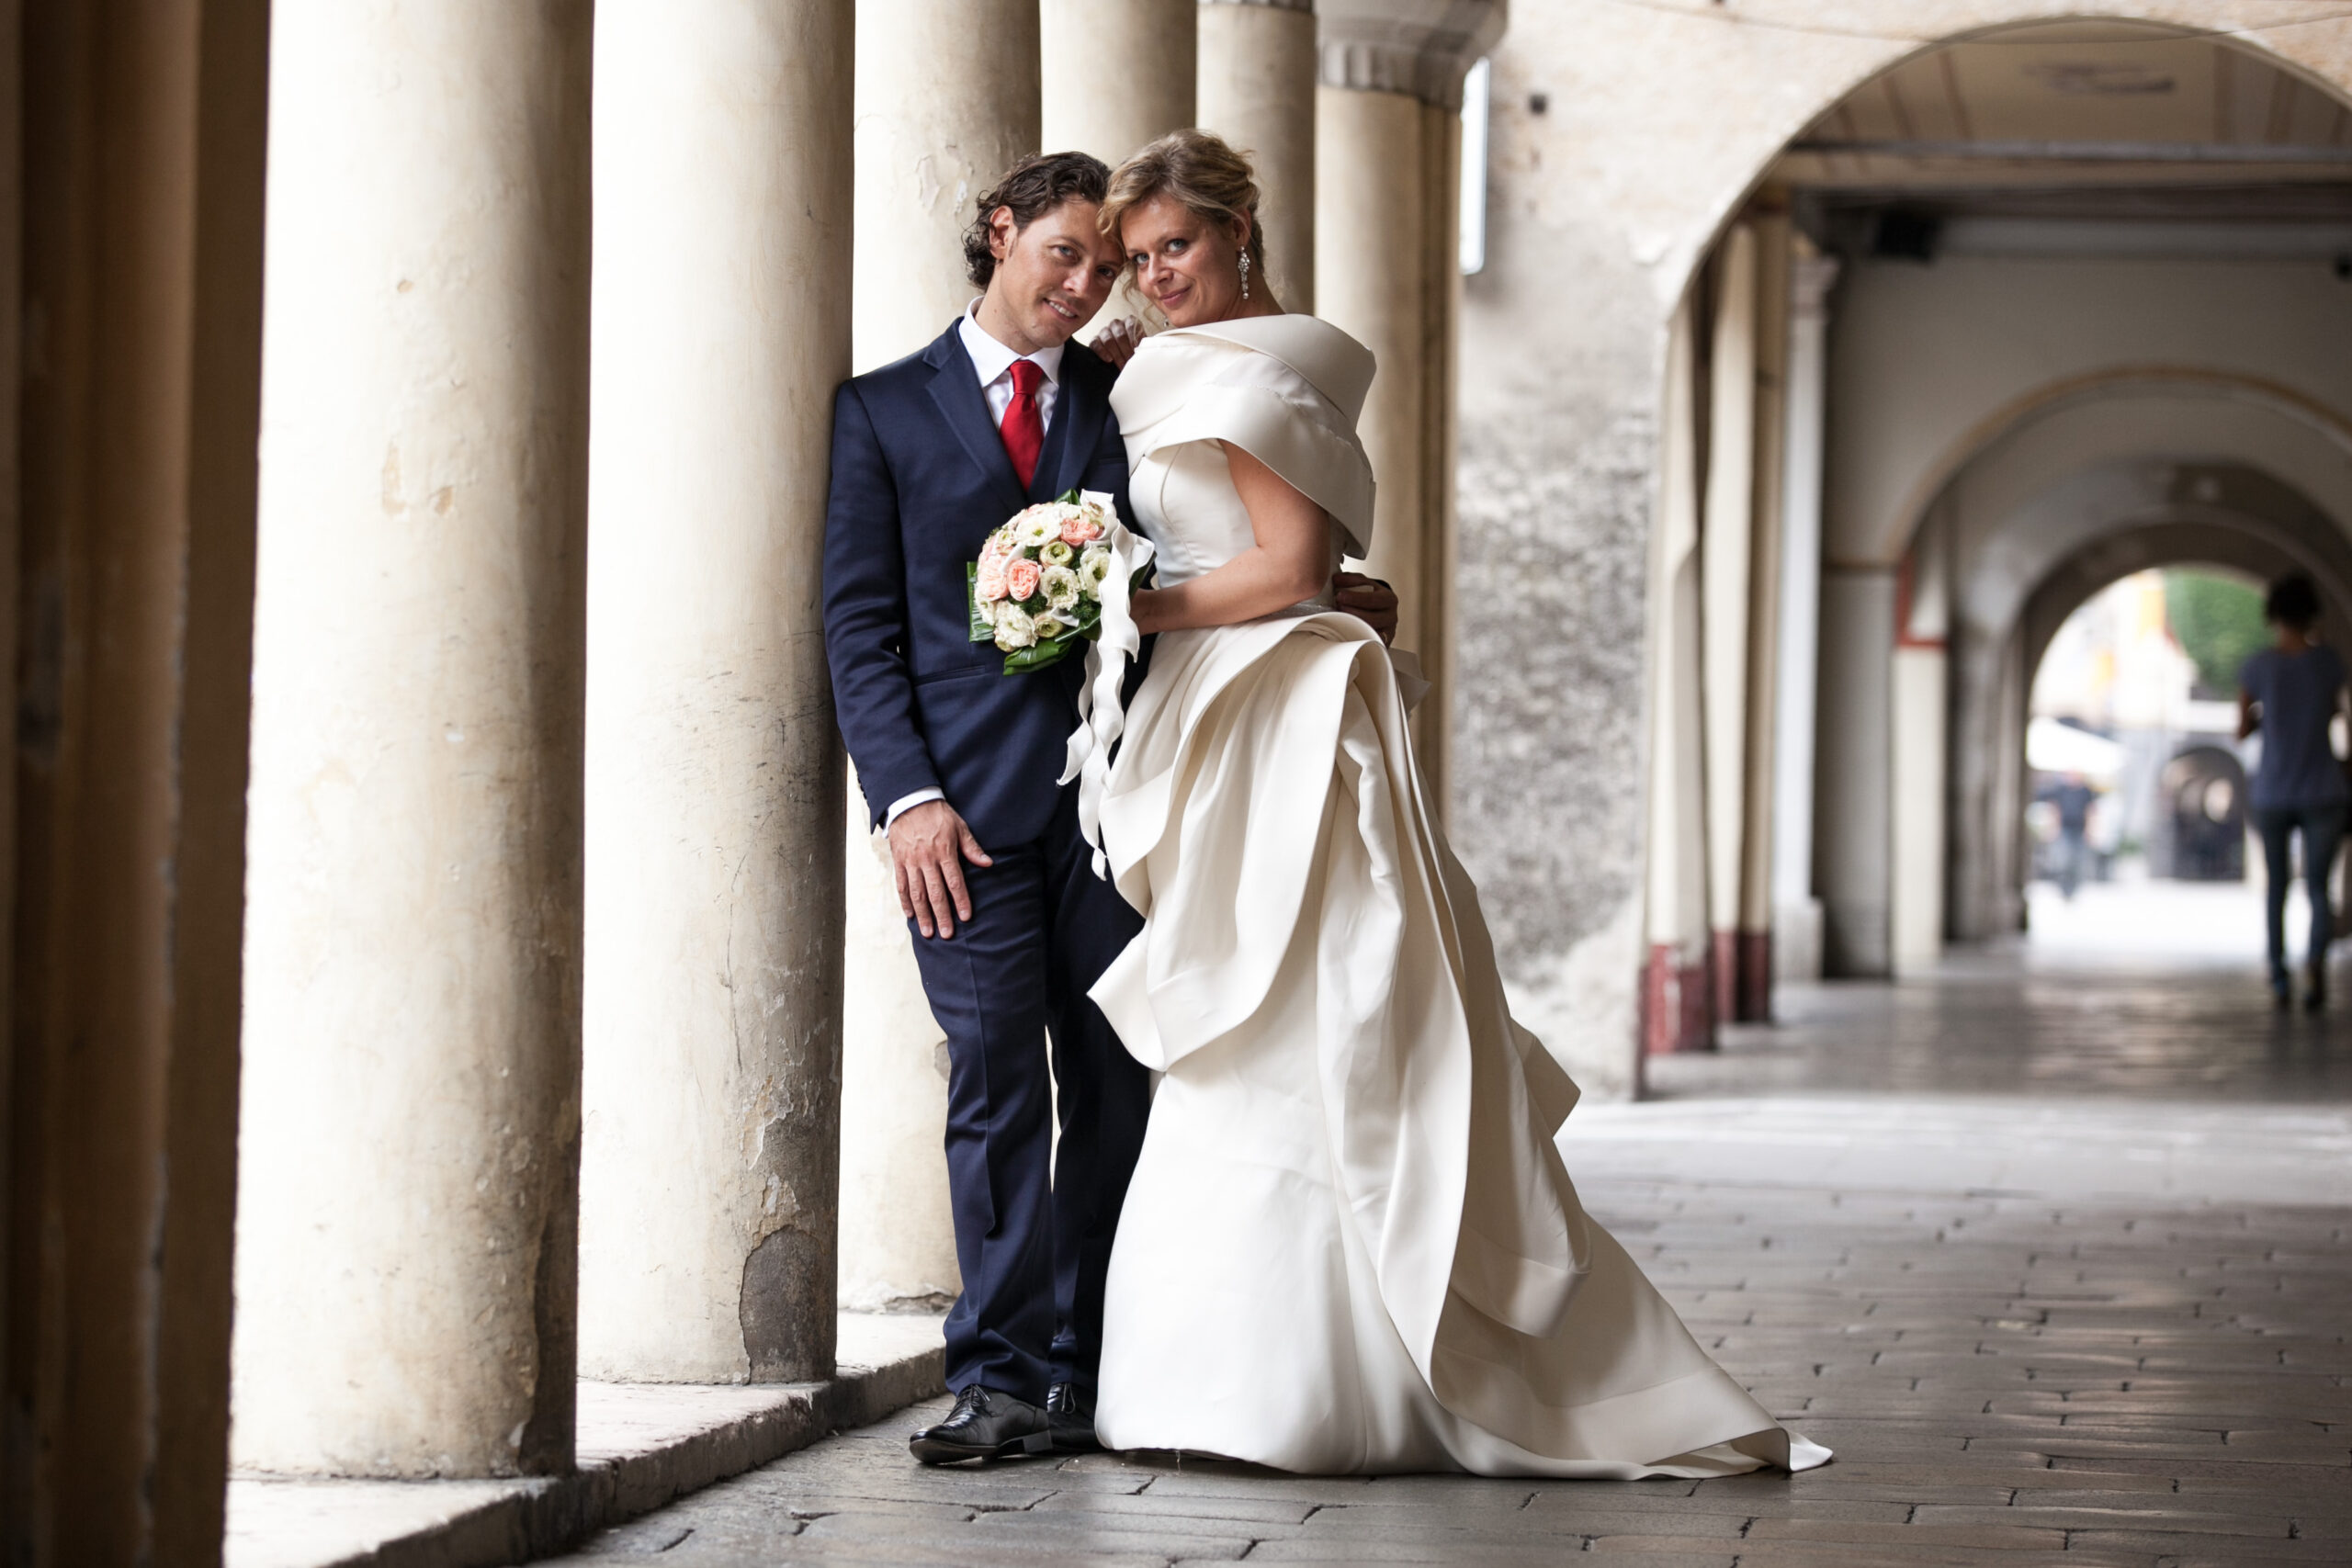 The sky in a room: Silvia and Emanuele’s wedding story